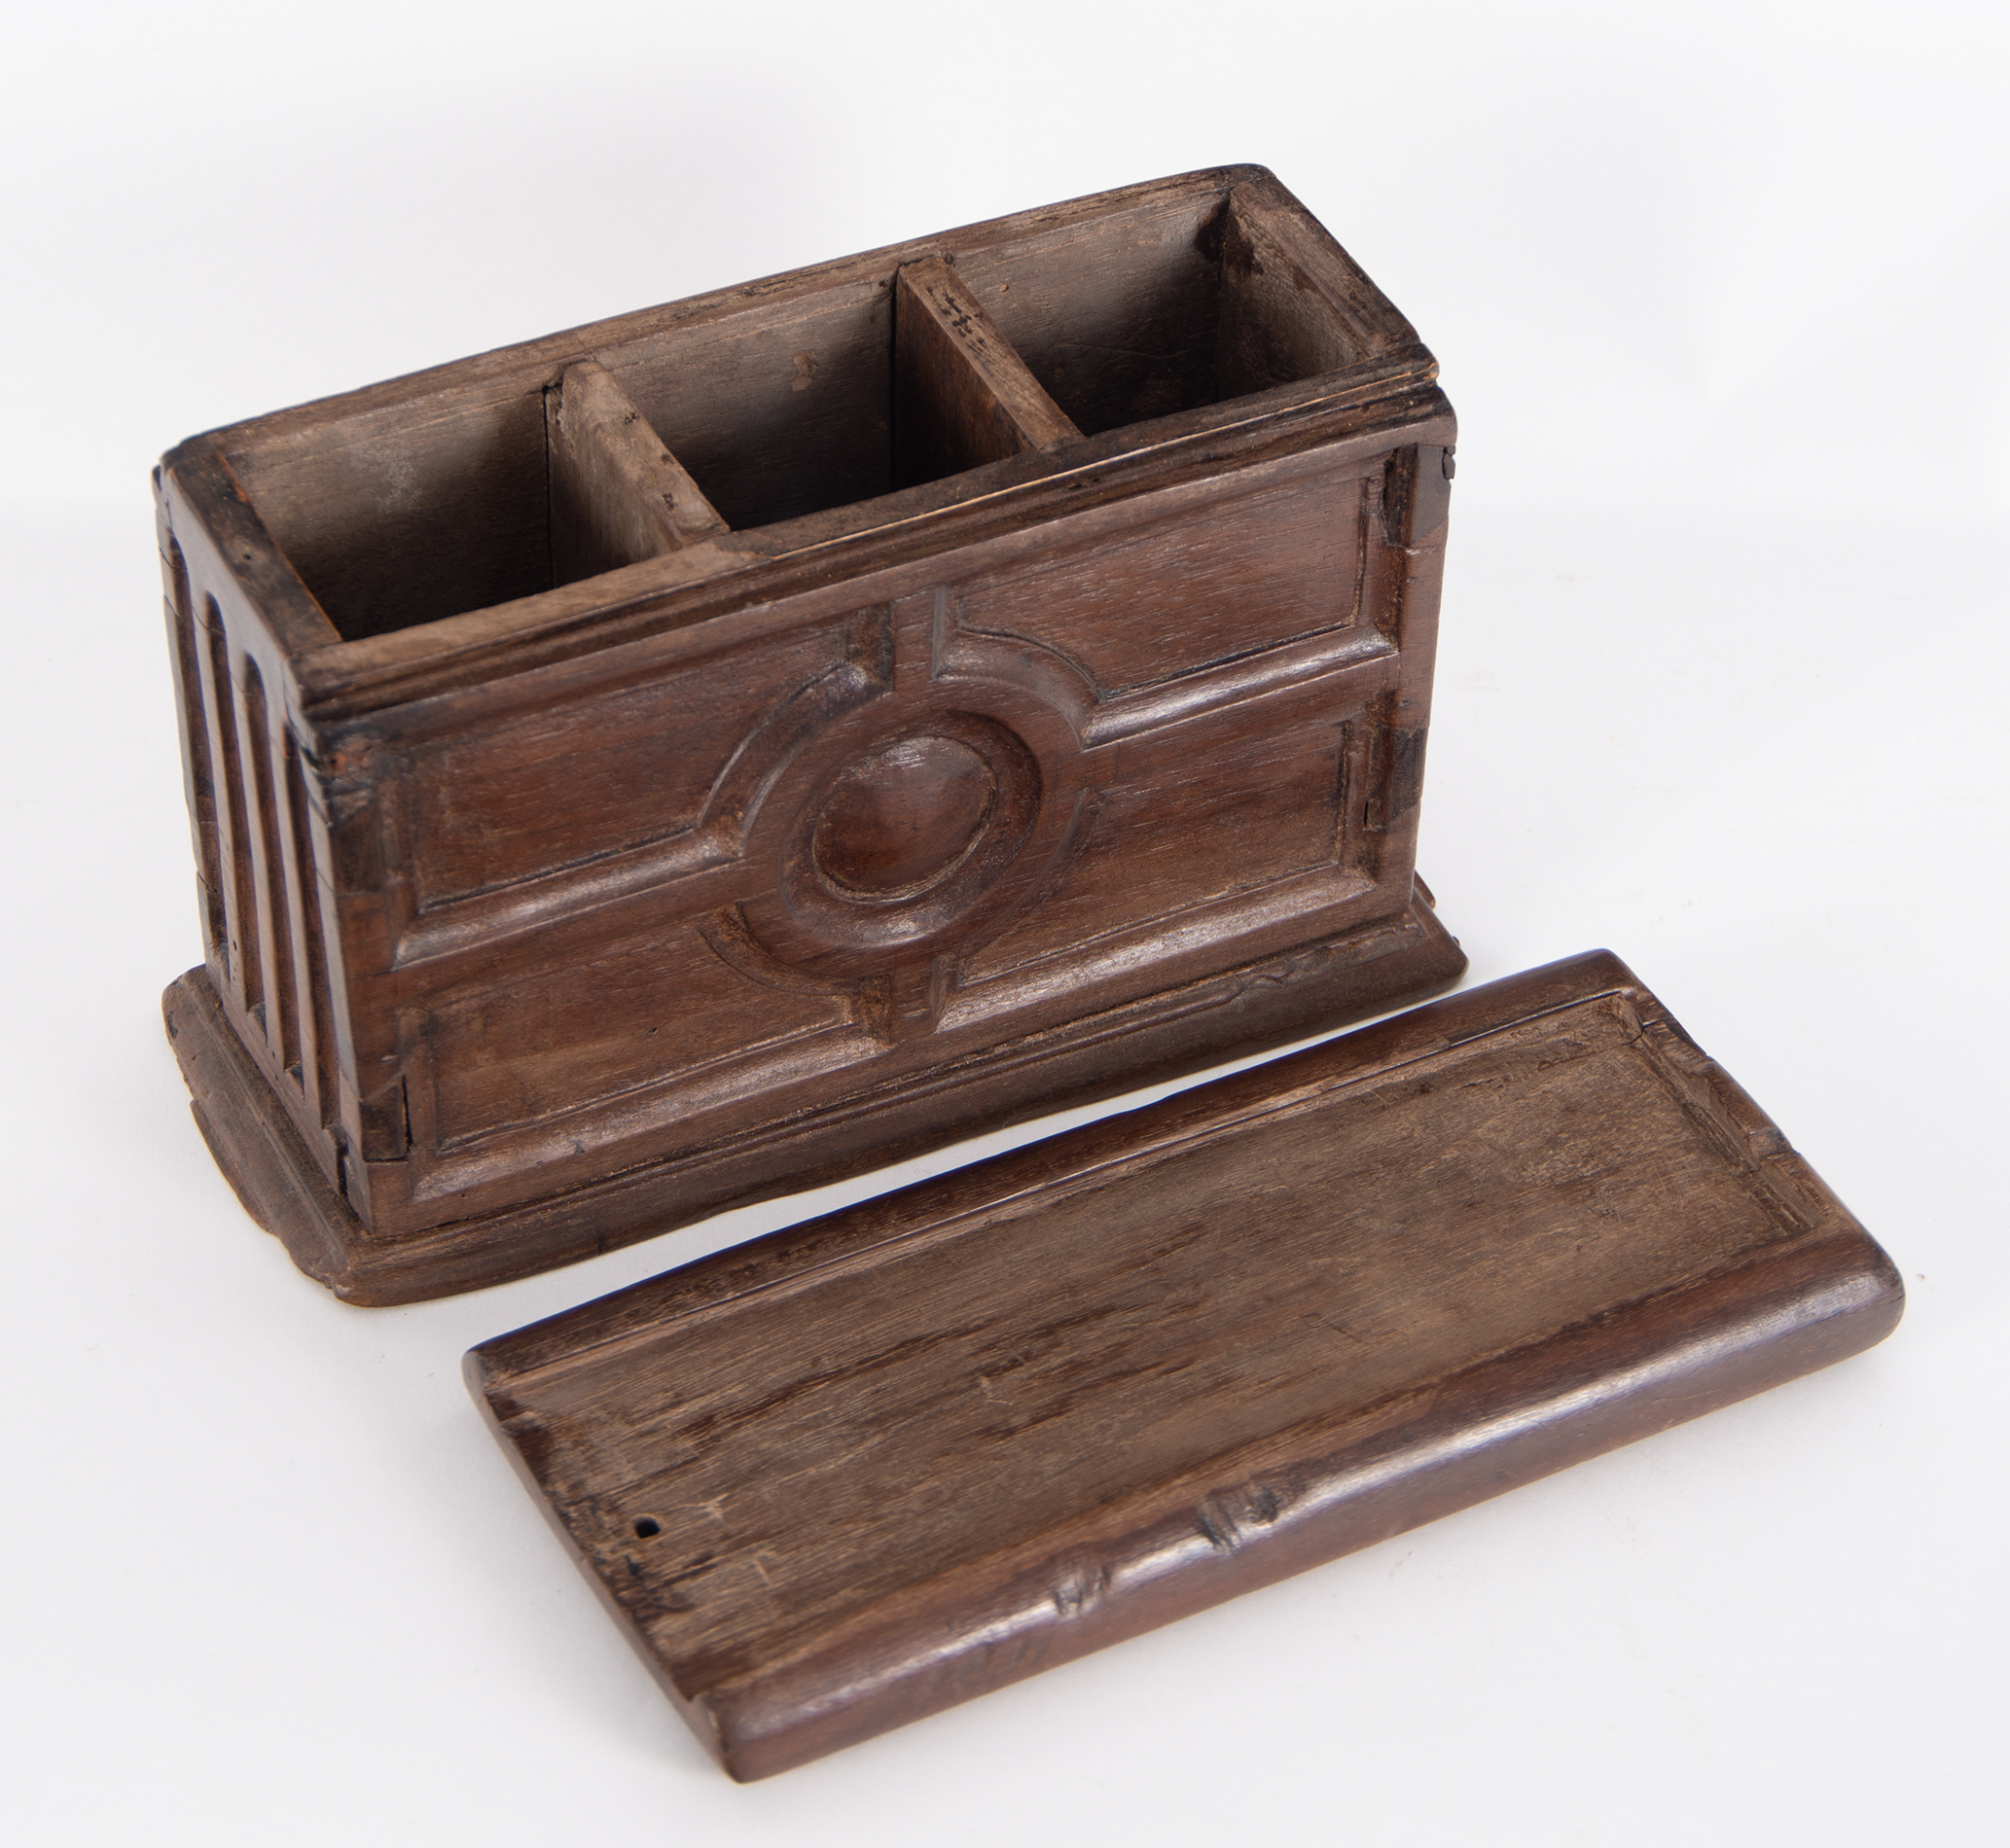 Box for the Holy Oils, Spanish school of the 17th century - Image 7 of 7